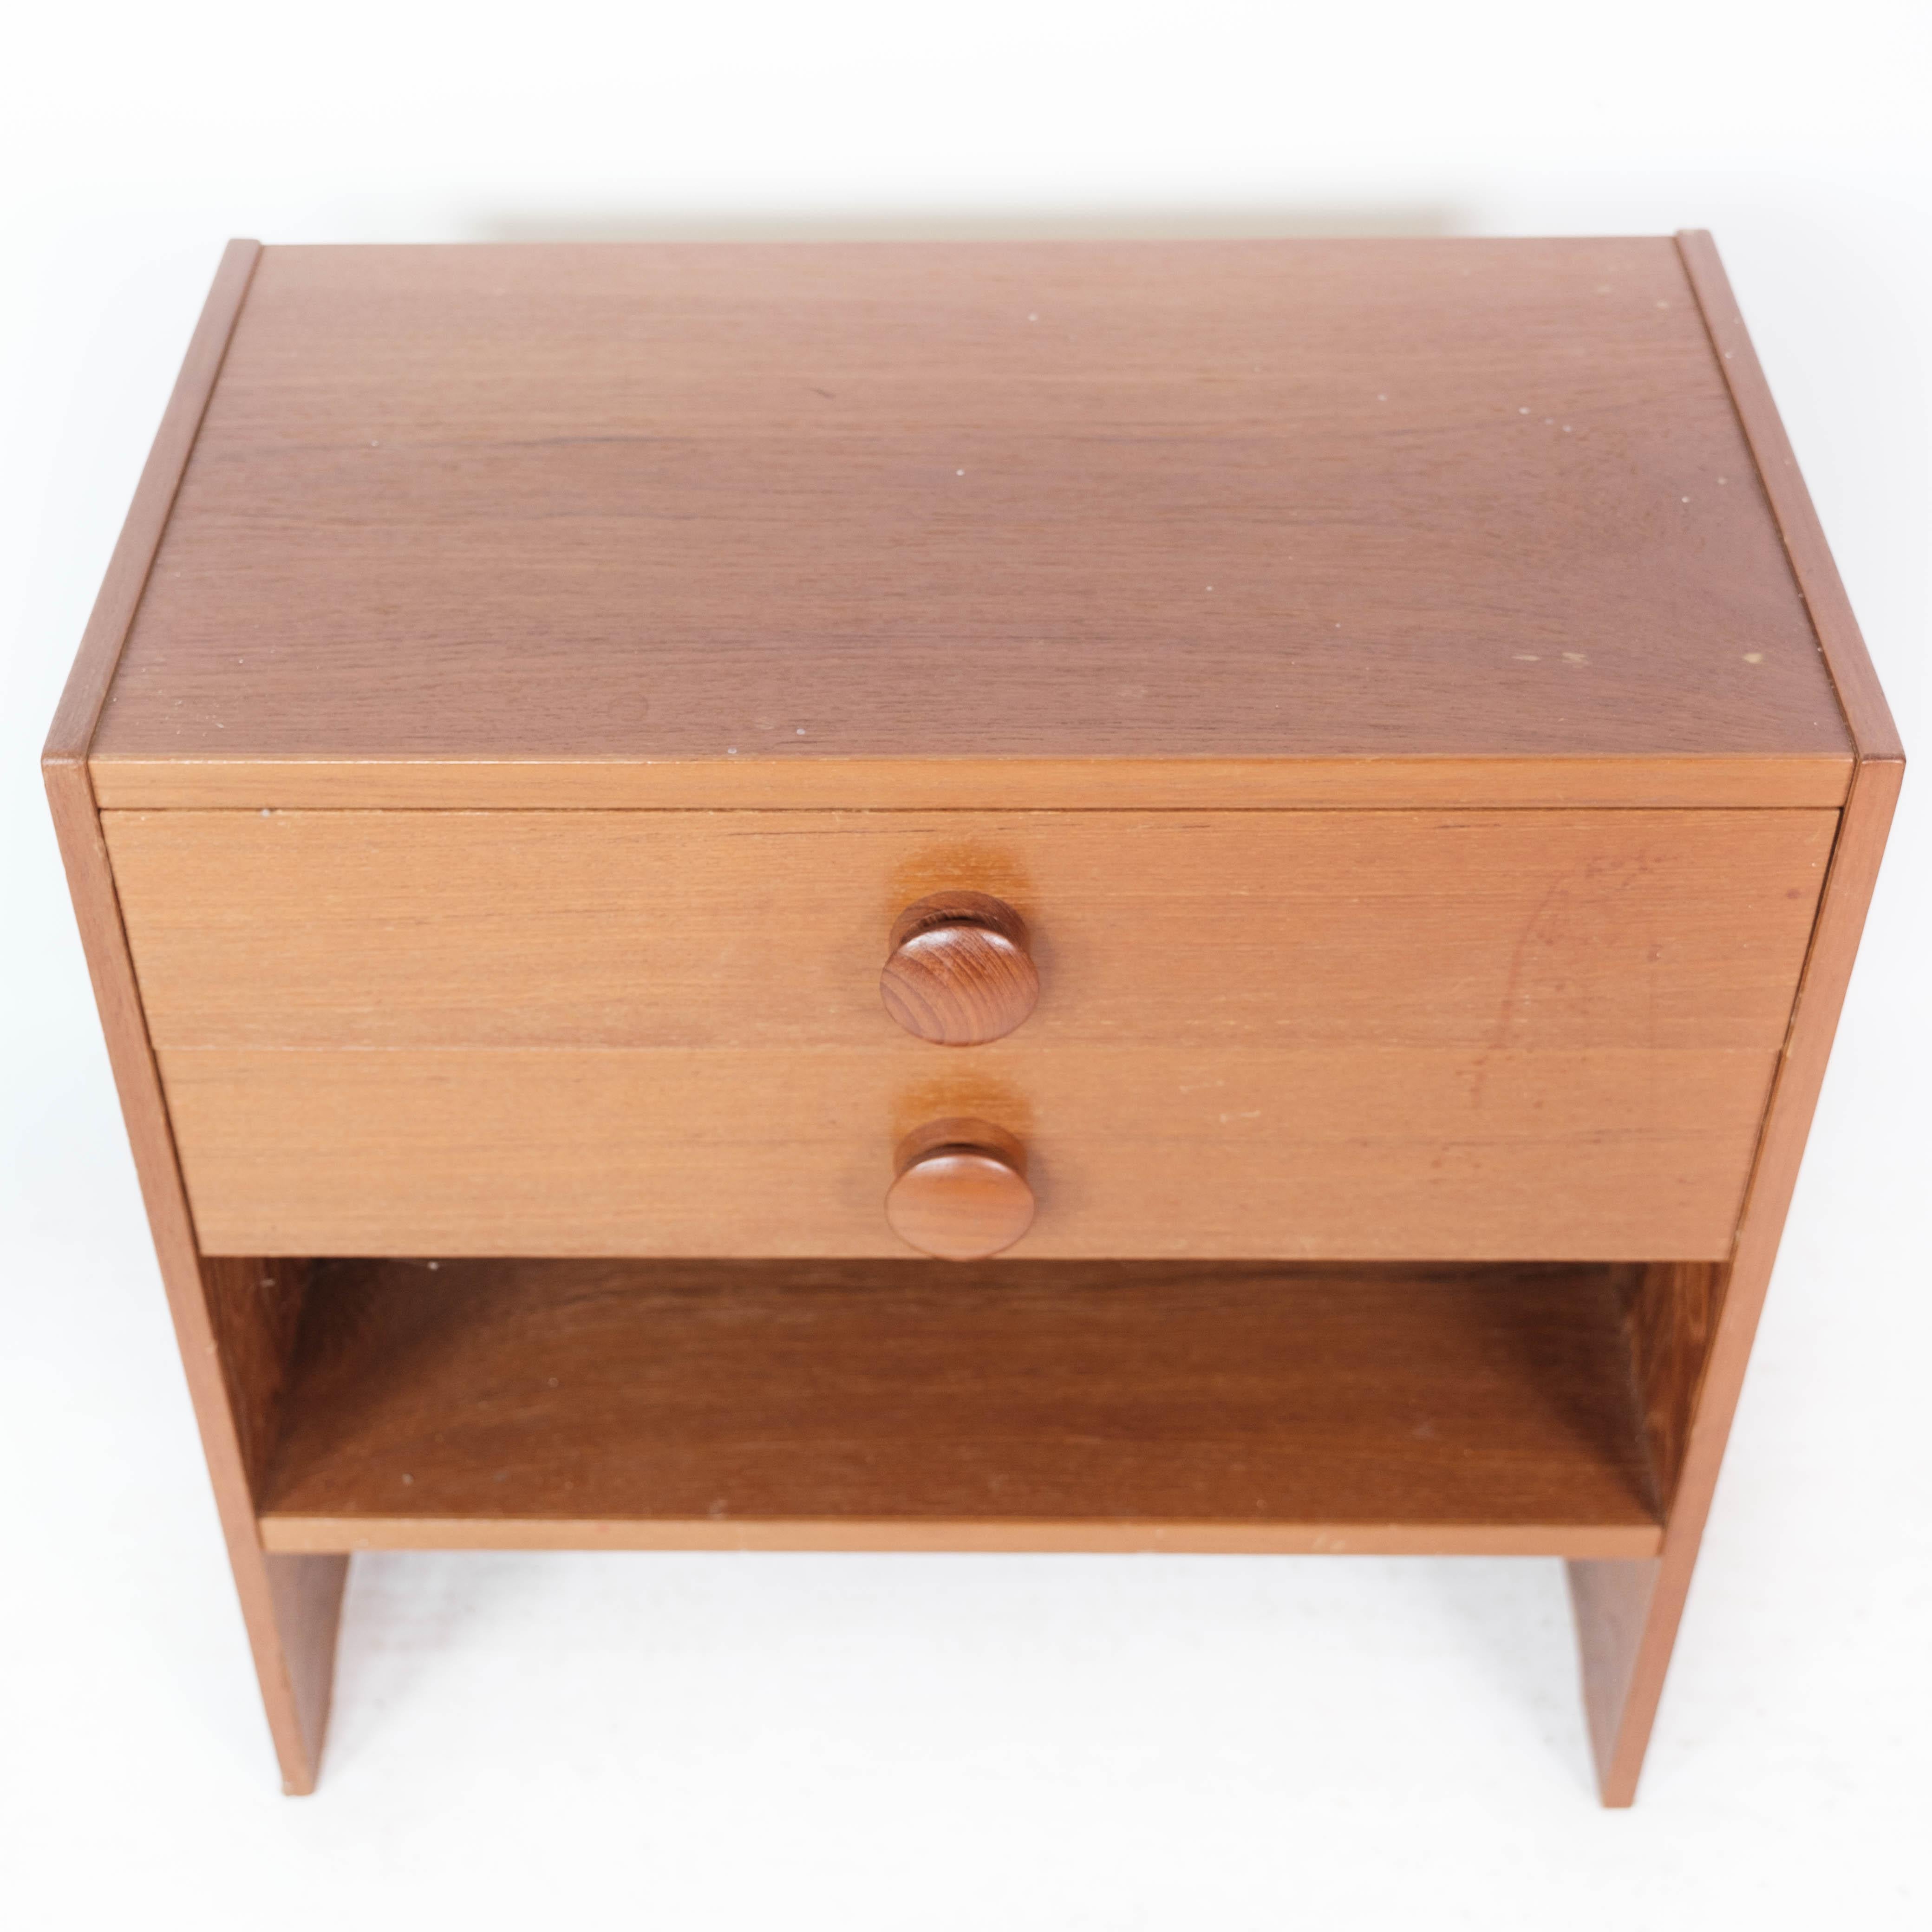 Bedside table with drawers in teak of Danish design manufactured by PBJ Furniture in the 1960s. The table is in great vintage condition.